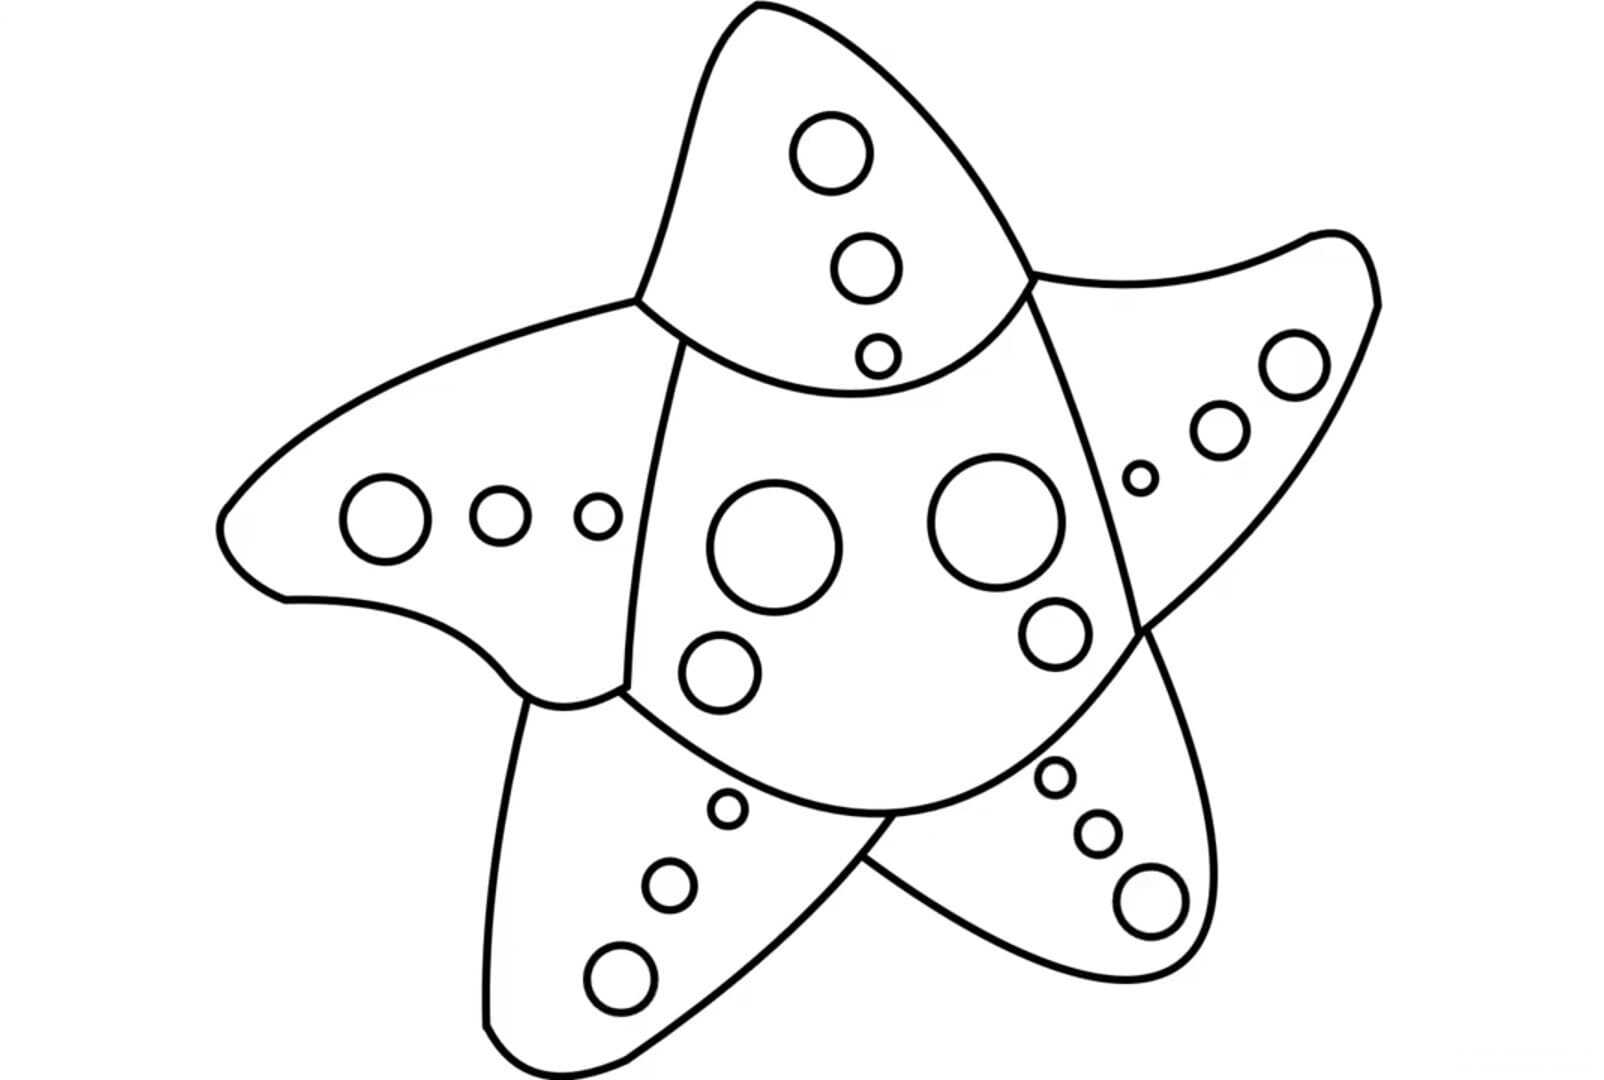 Adopt Me Starfish Has Three Spots On Each Arm Coloring Pages